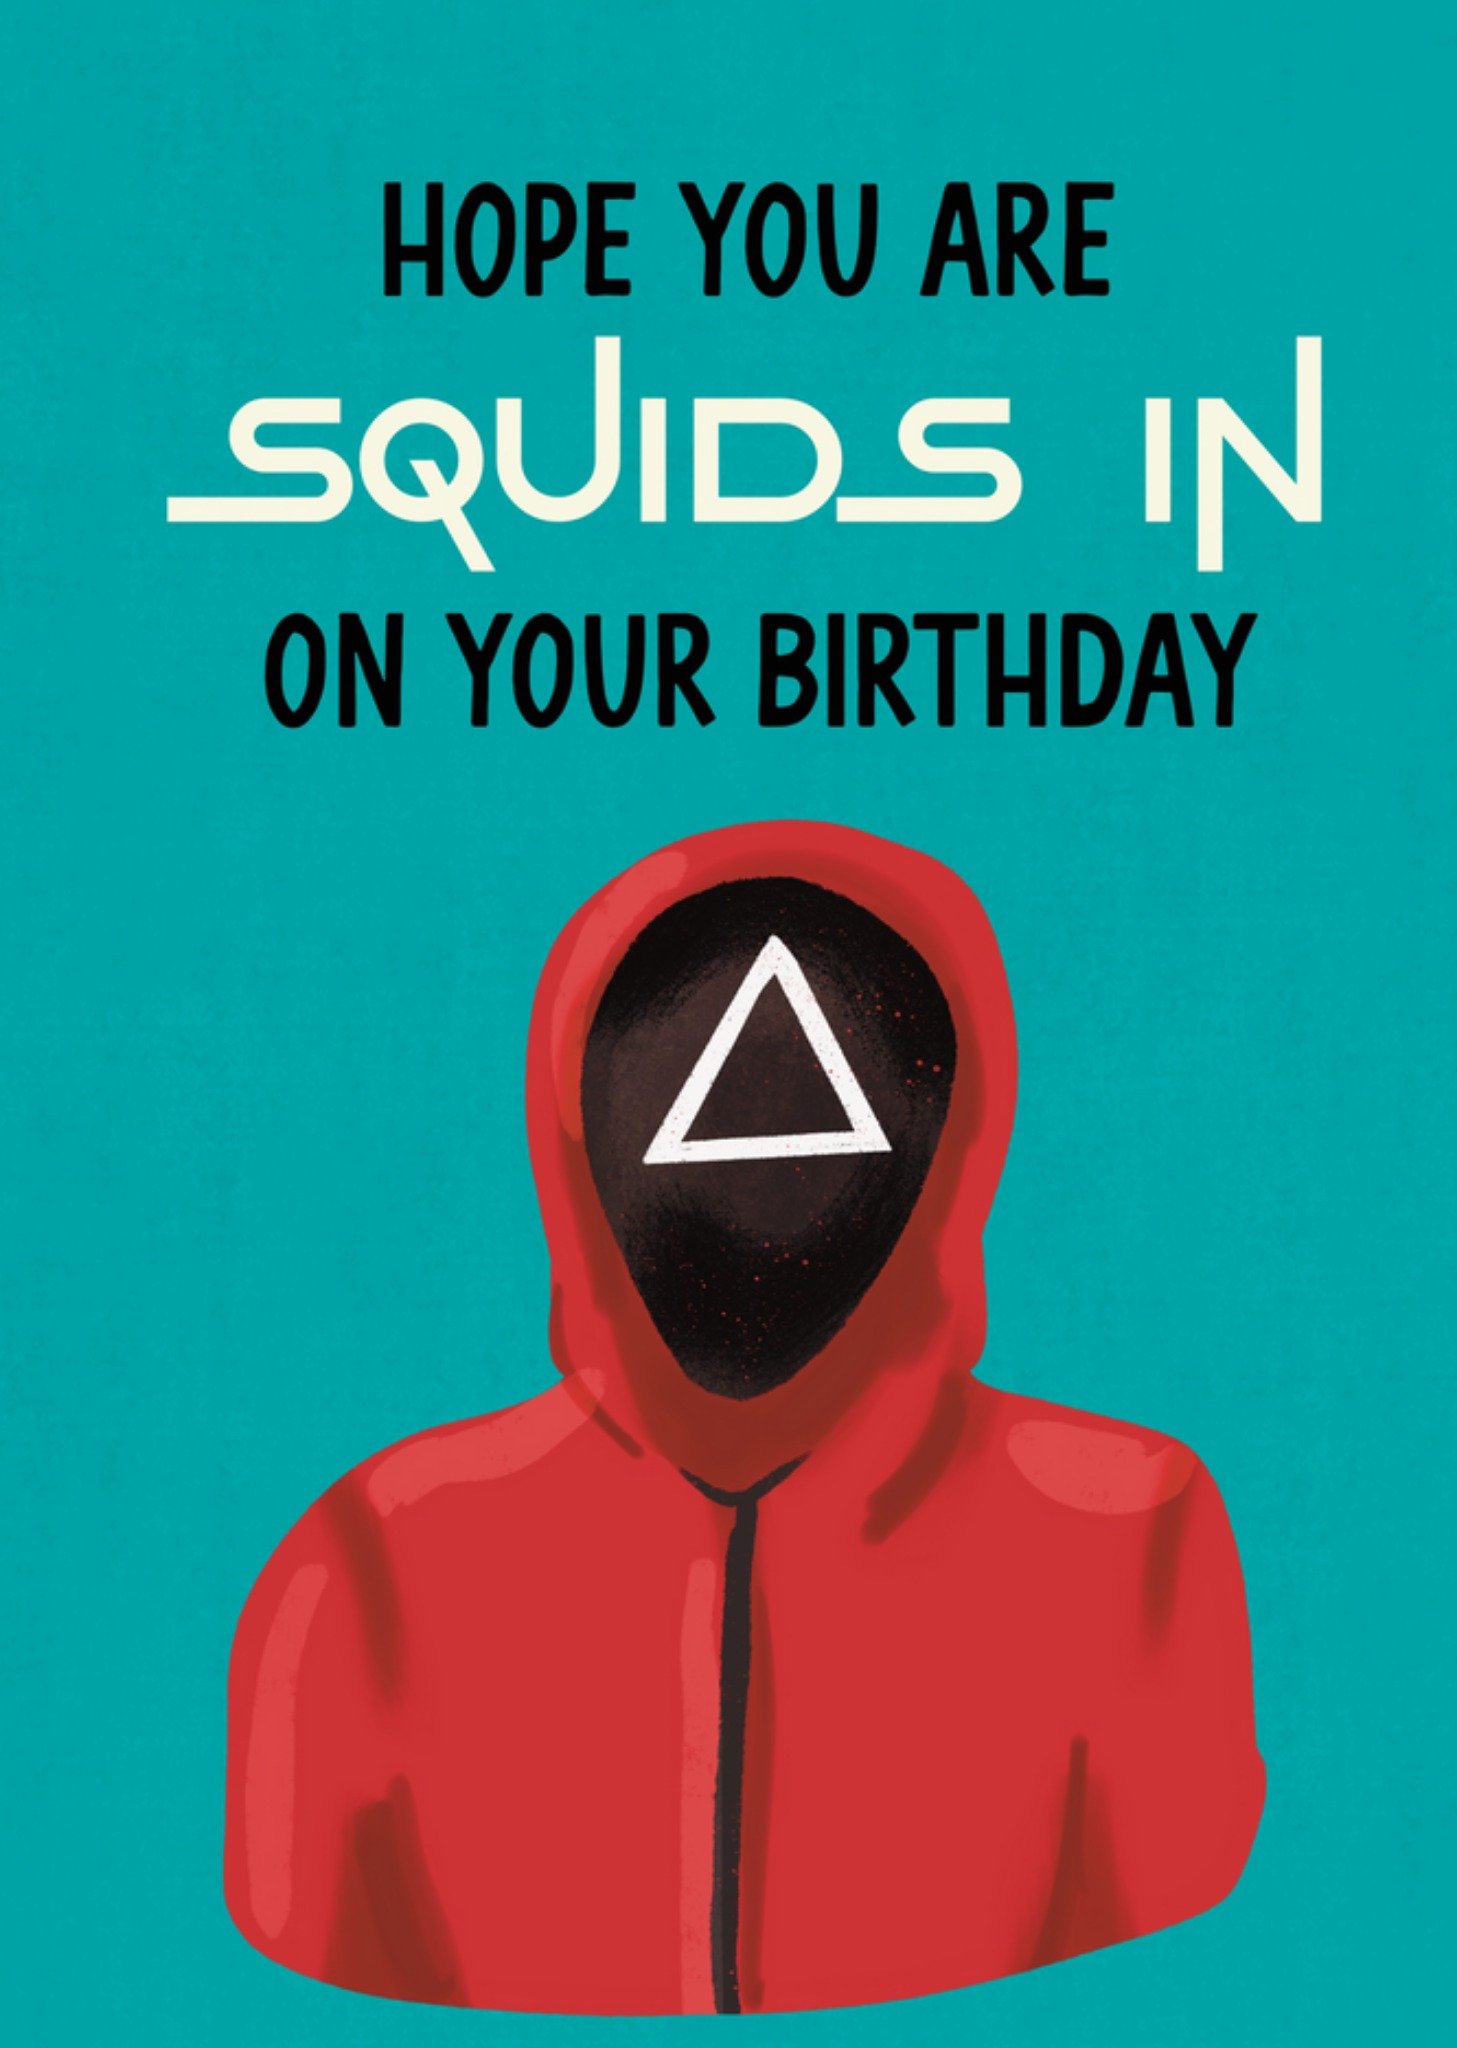 Moonpig Hope You Are Squids In On Your Birthday Card, Large